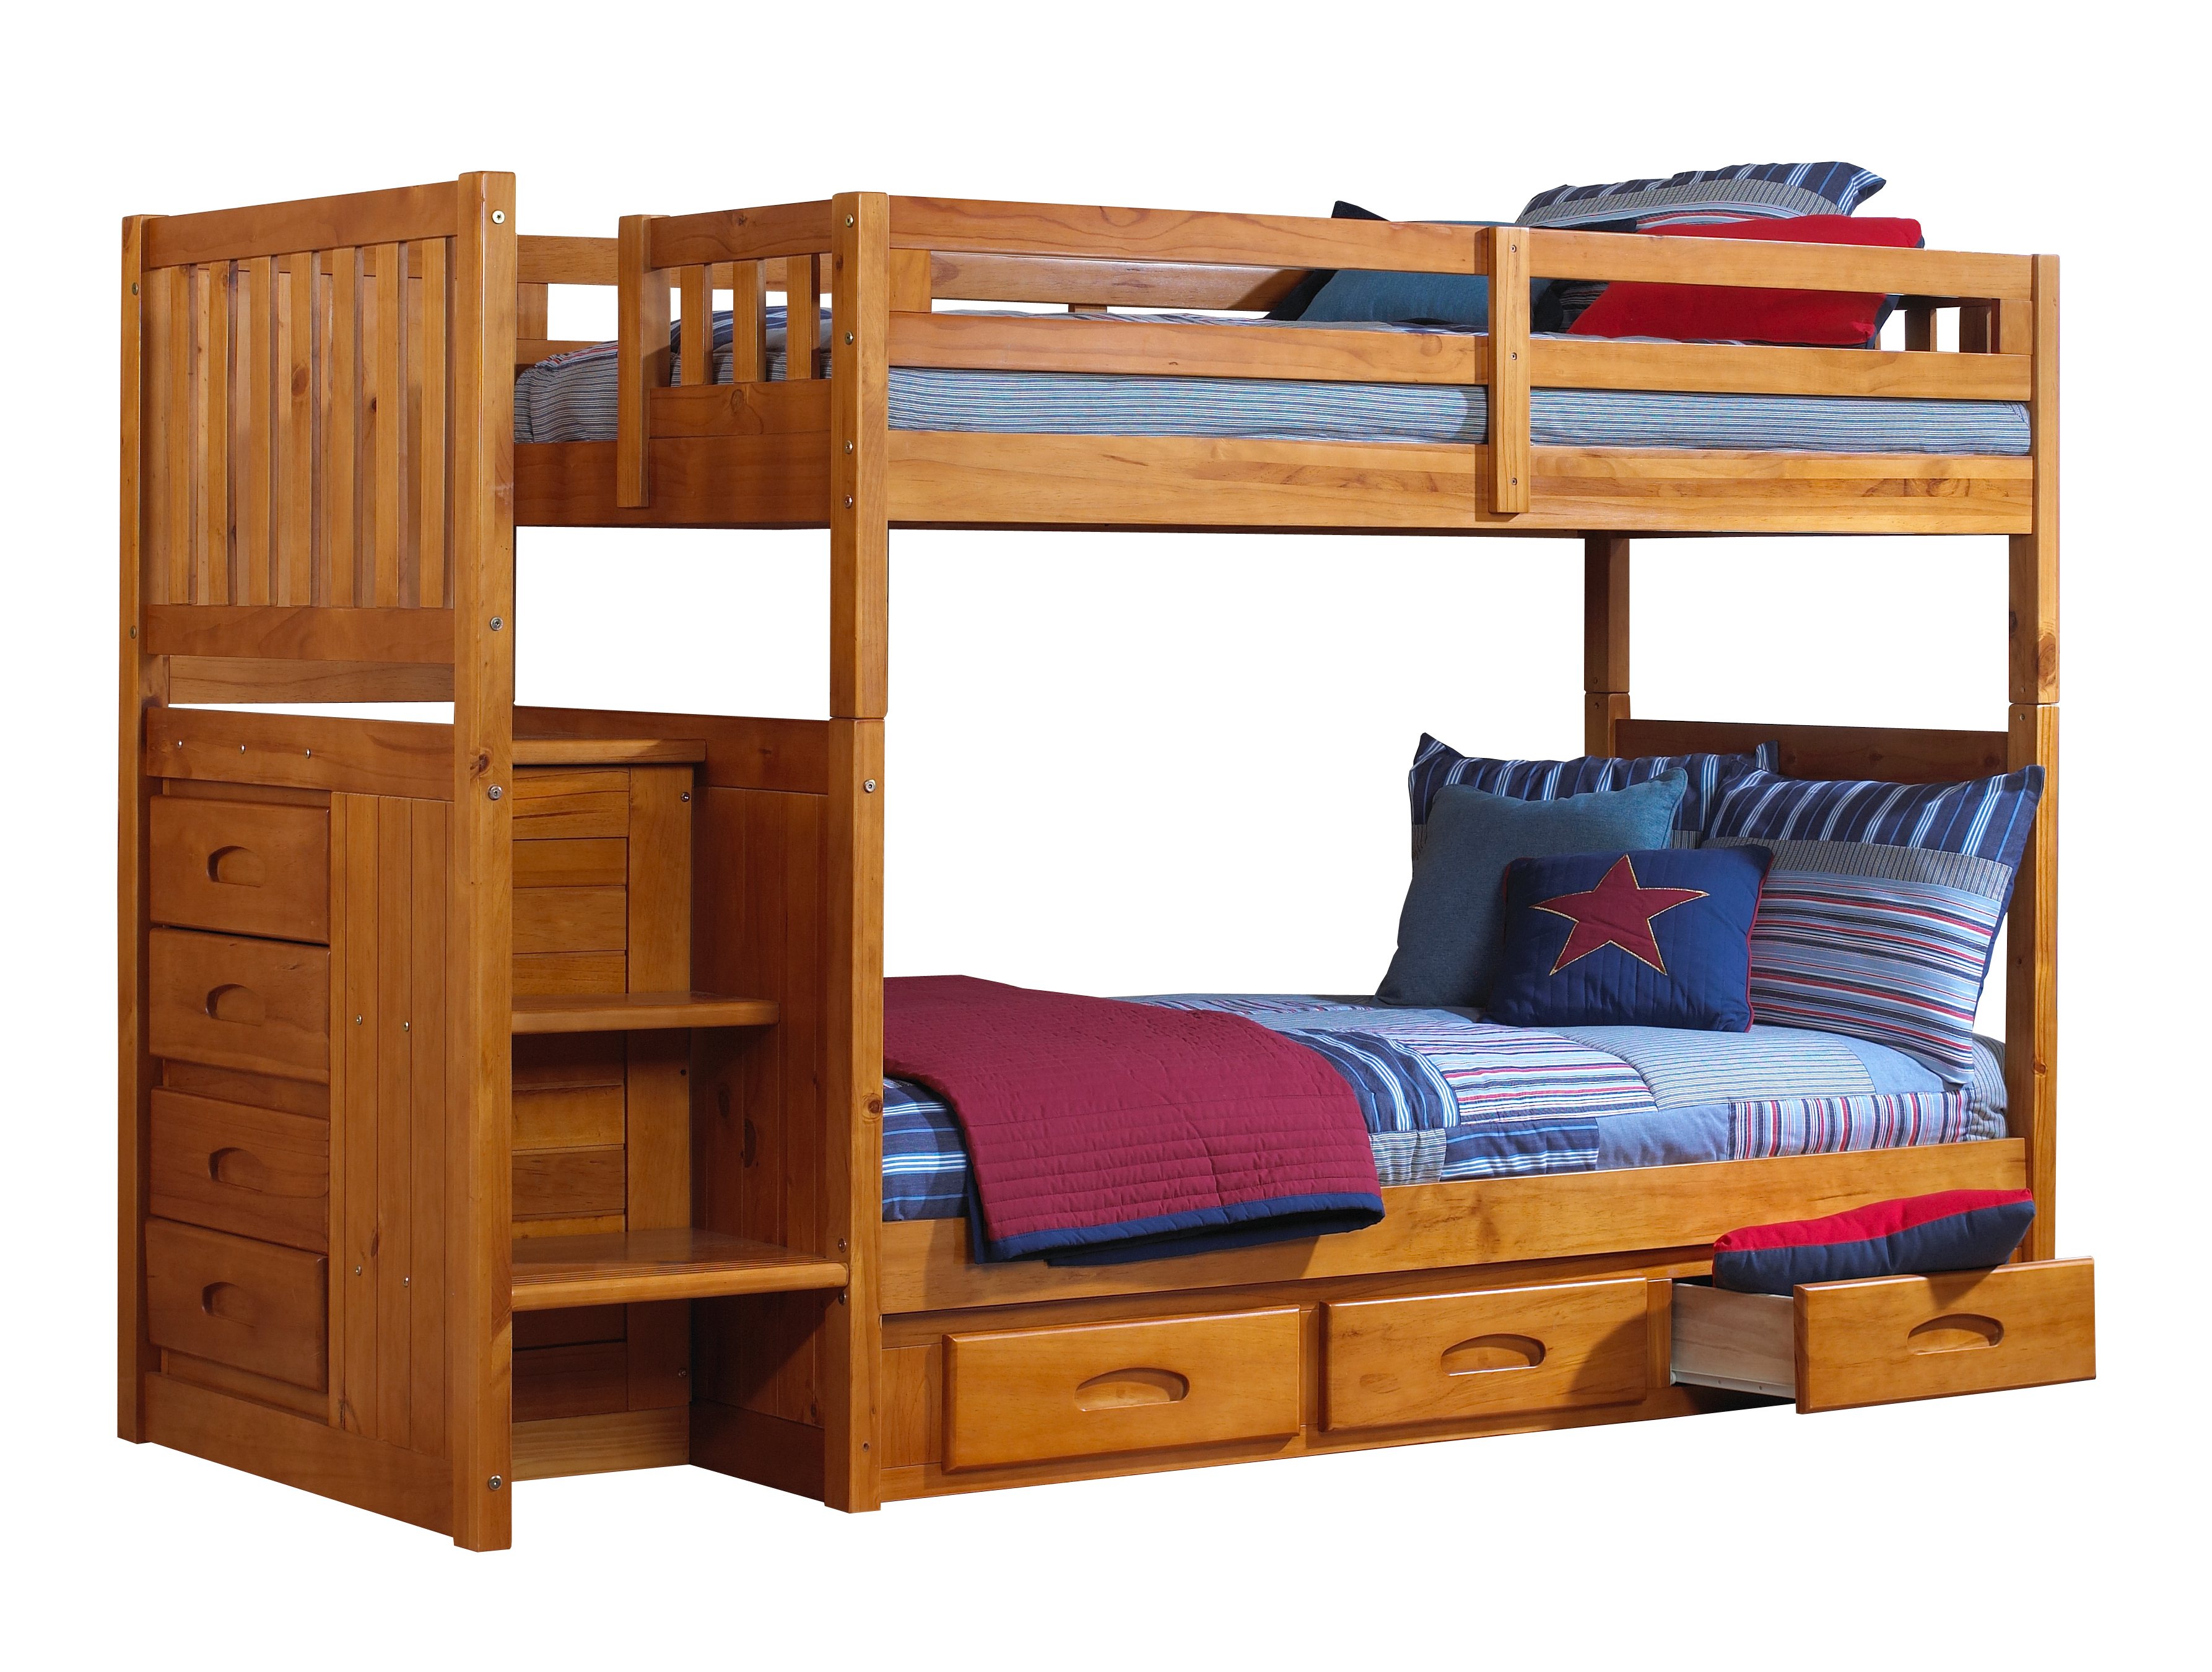 childrens double beds with storage